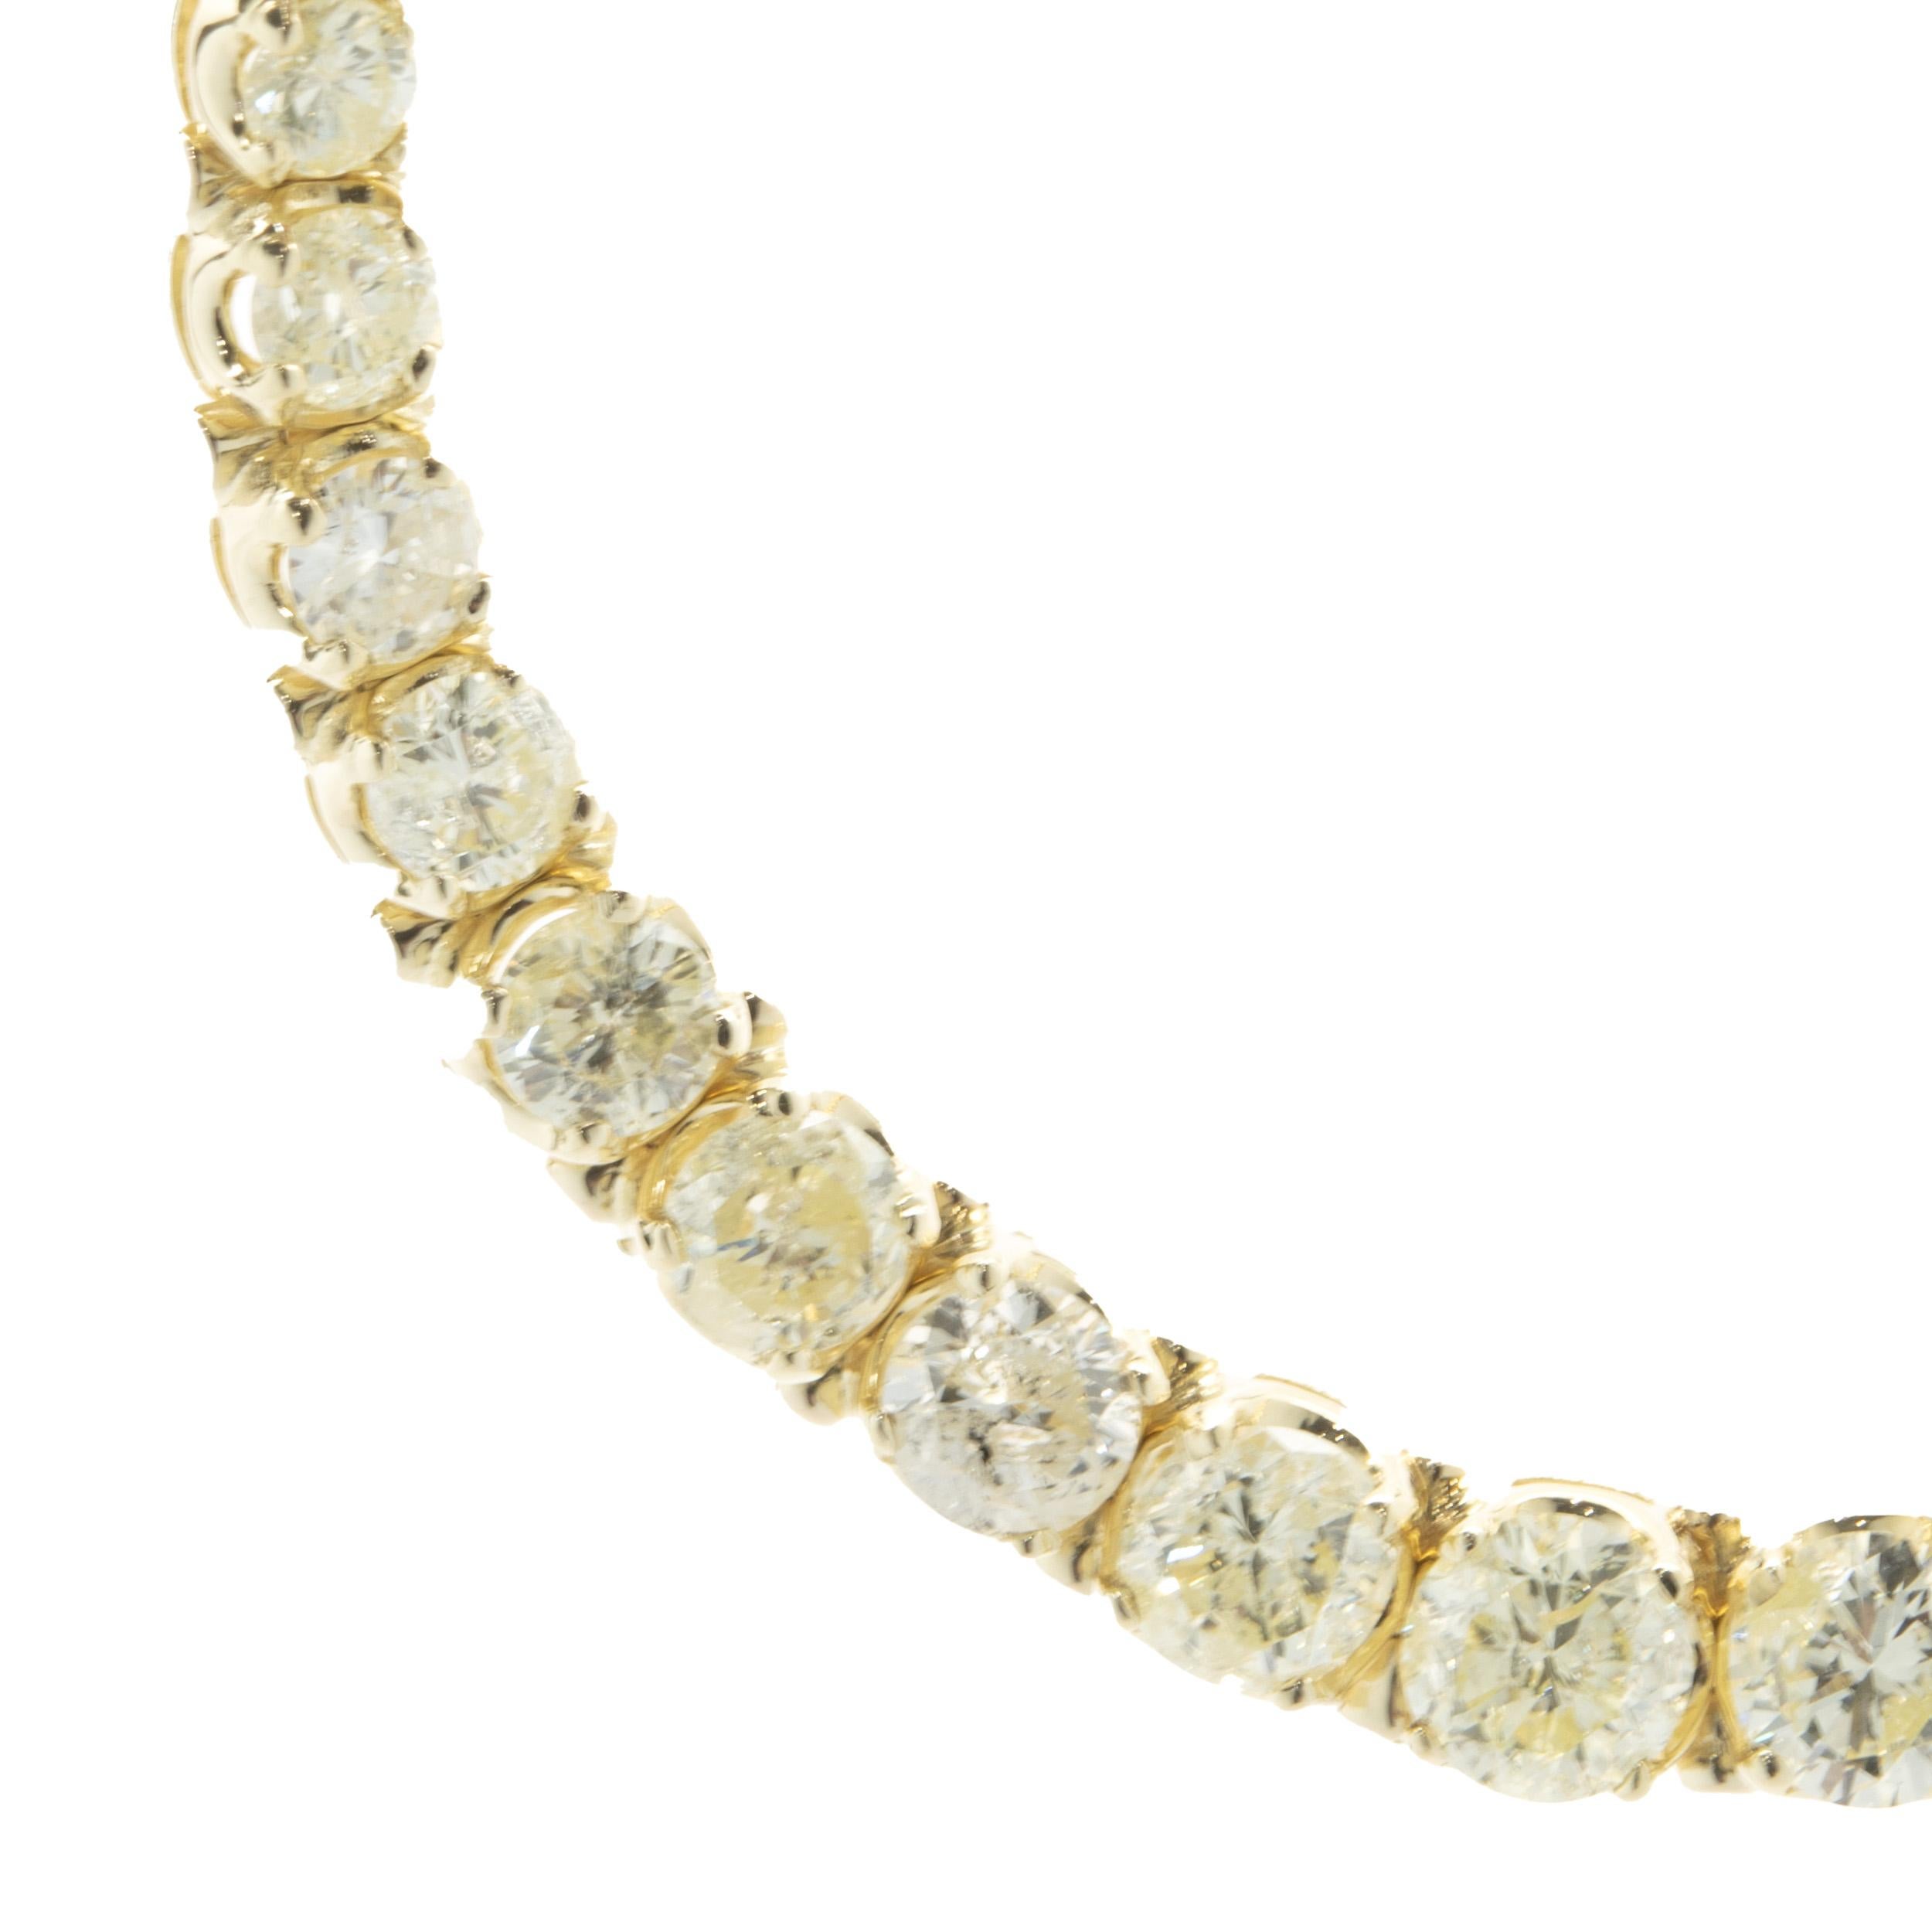 Designer: custom
Material: 14K yellow  gold
Diamonds: 103 round brilliant cut = 9.00cttw
Color: J / K / L
Clarity: I1-2
Dimensions: necklace measures 18-inches in length 
Weight: 31.55 grams